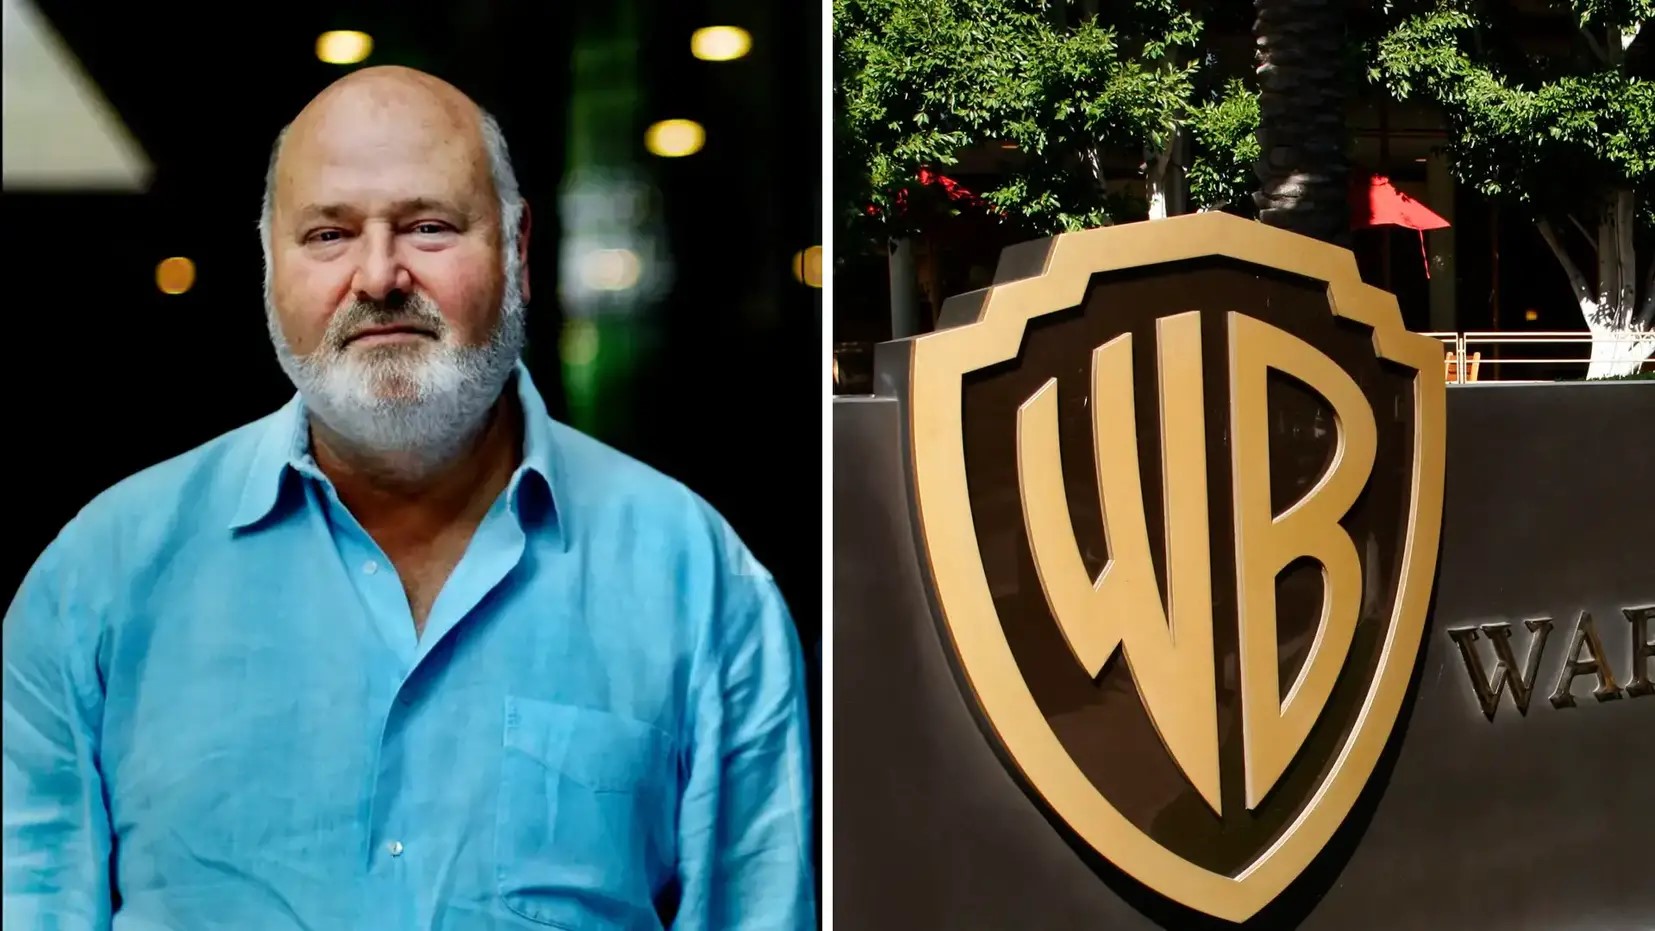 “He Was Spreading Too Much Wokeness”: Warner Bros Terminates $50 Million Production Deal with Rob Reiner